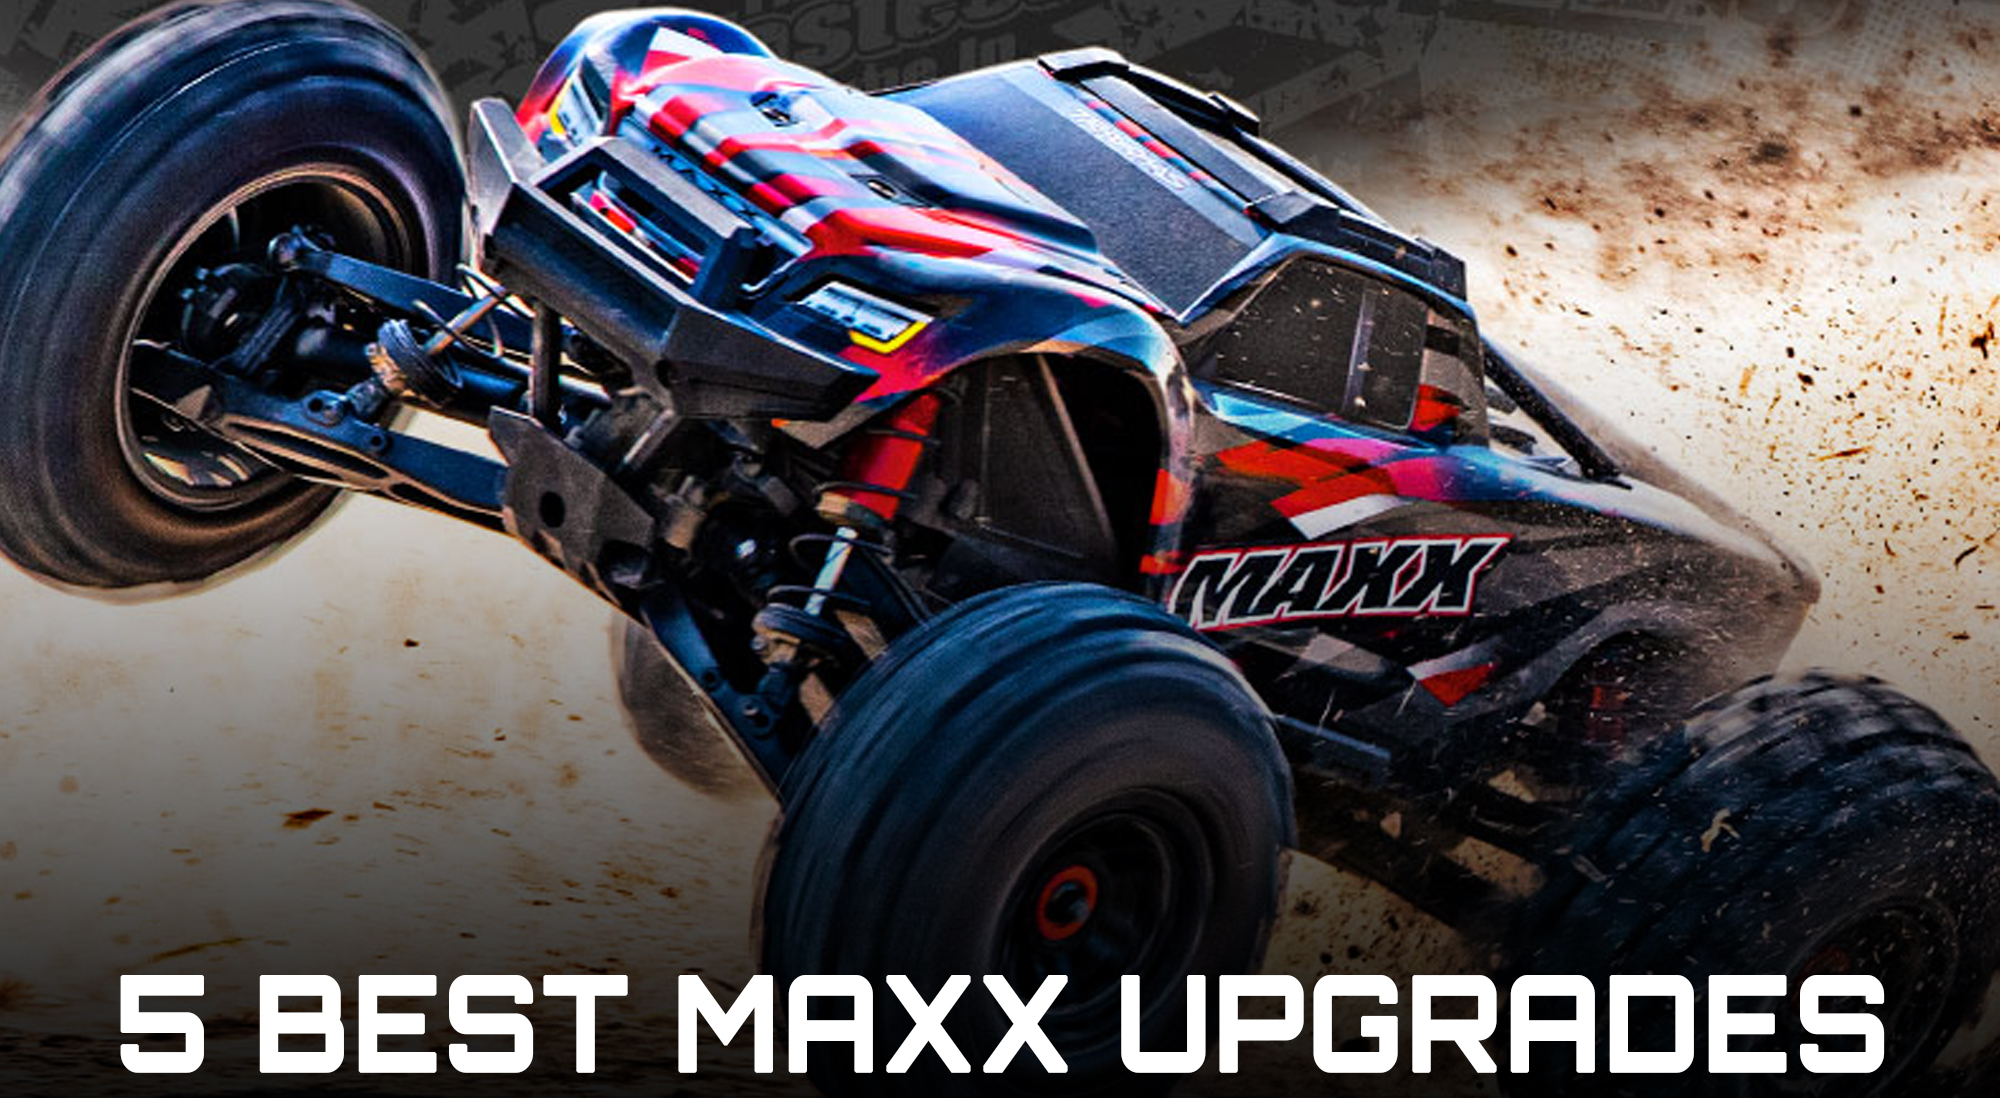 5 Best Upgrades for the Traxxas Maxx